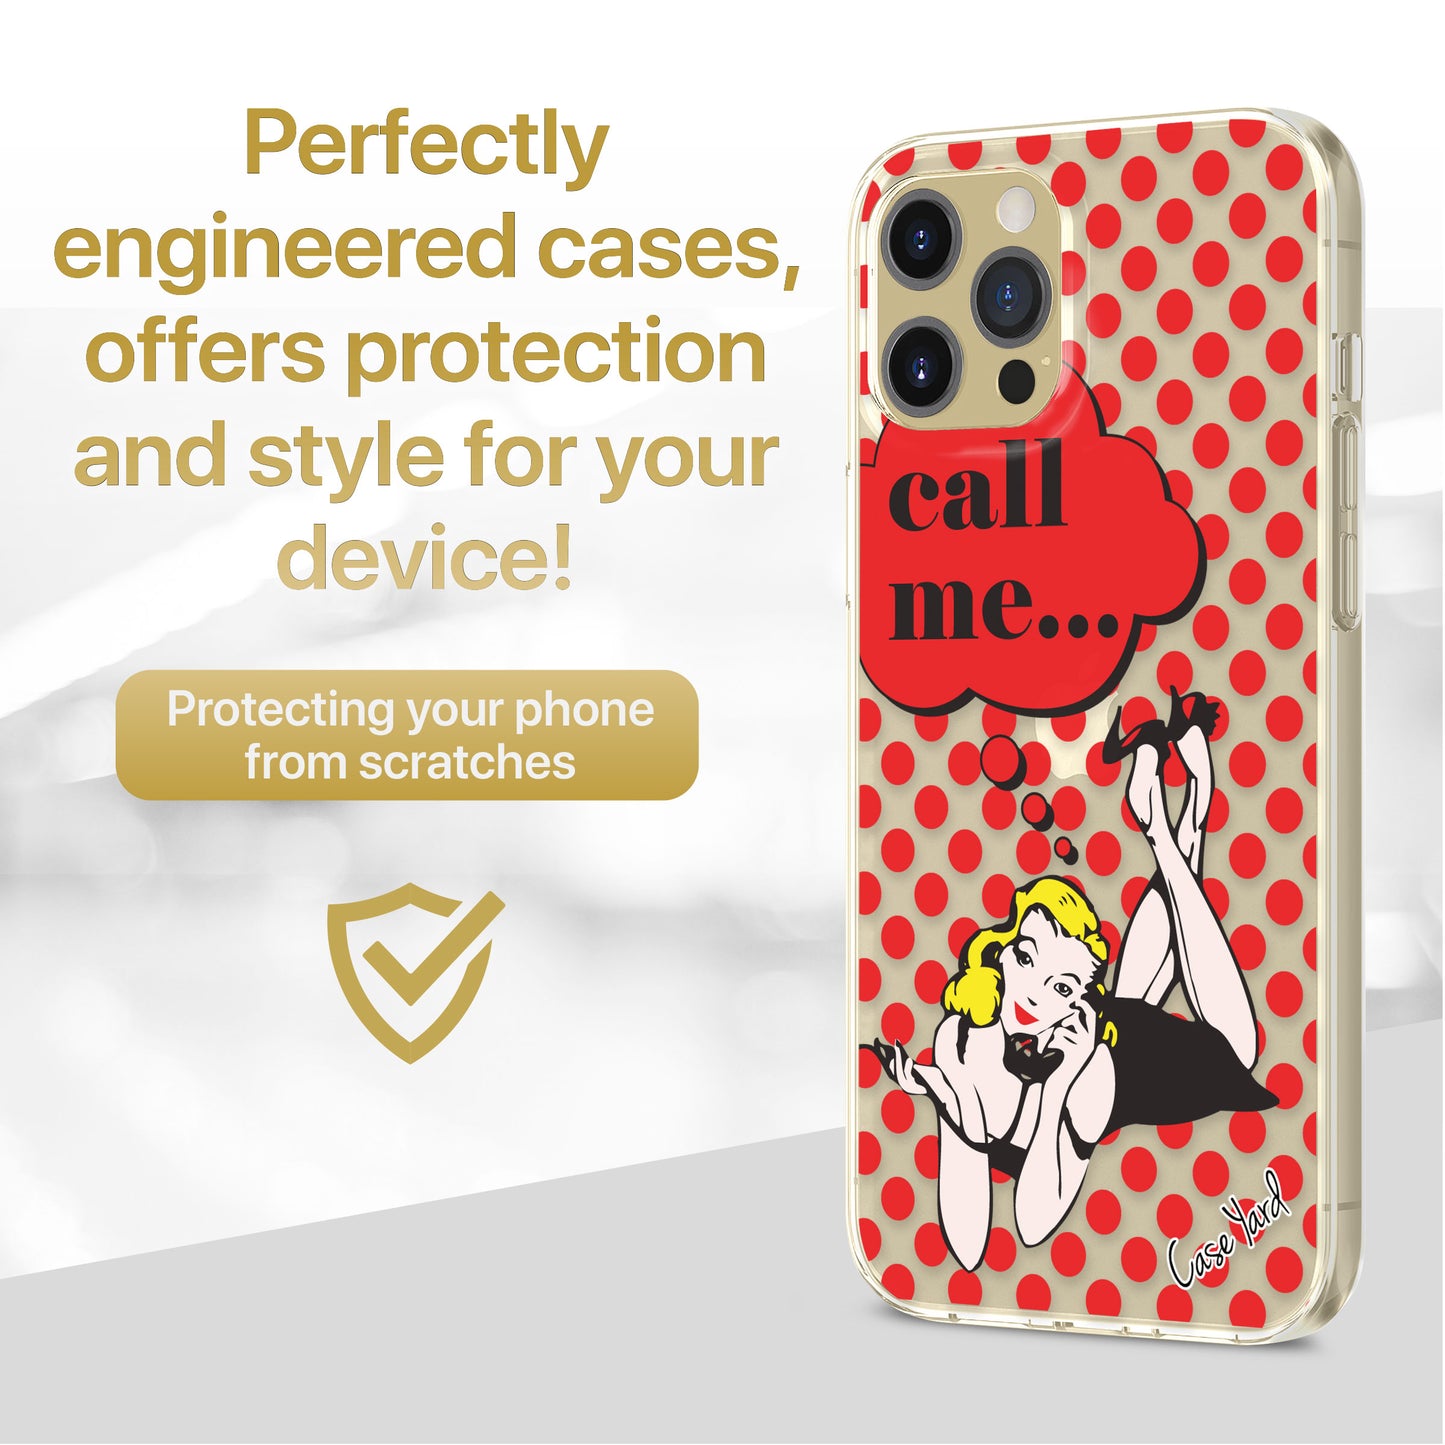 TPU Case Clear case with (Call Me) Design for iPhone & Samsung Phones